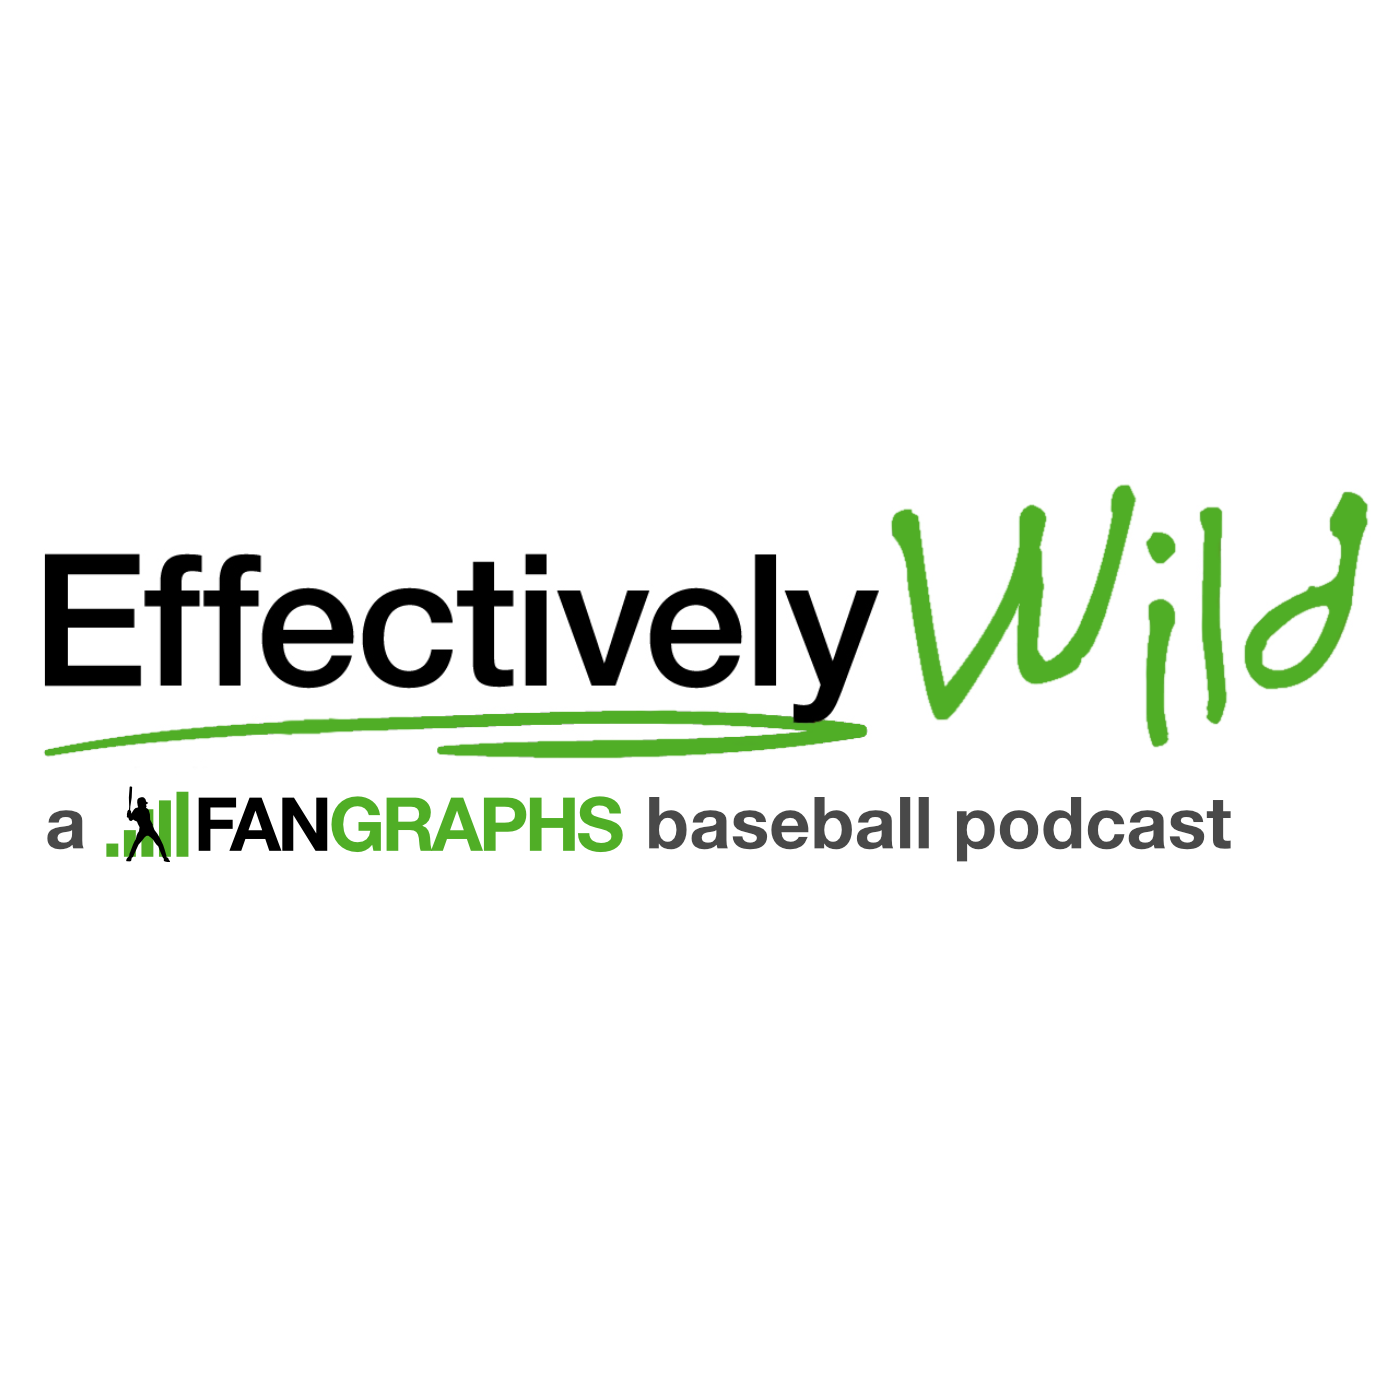 A highlight from Effectively Wild Episode 2009: Safe By a Hair